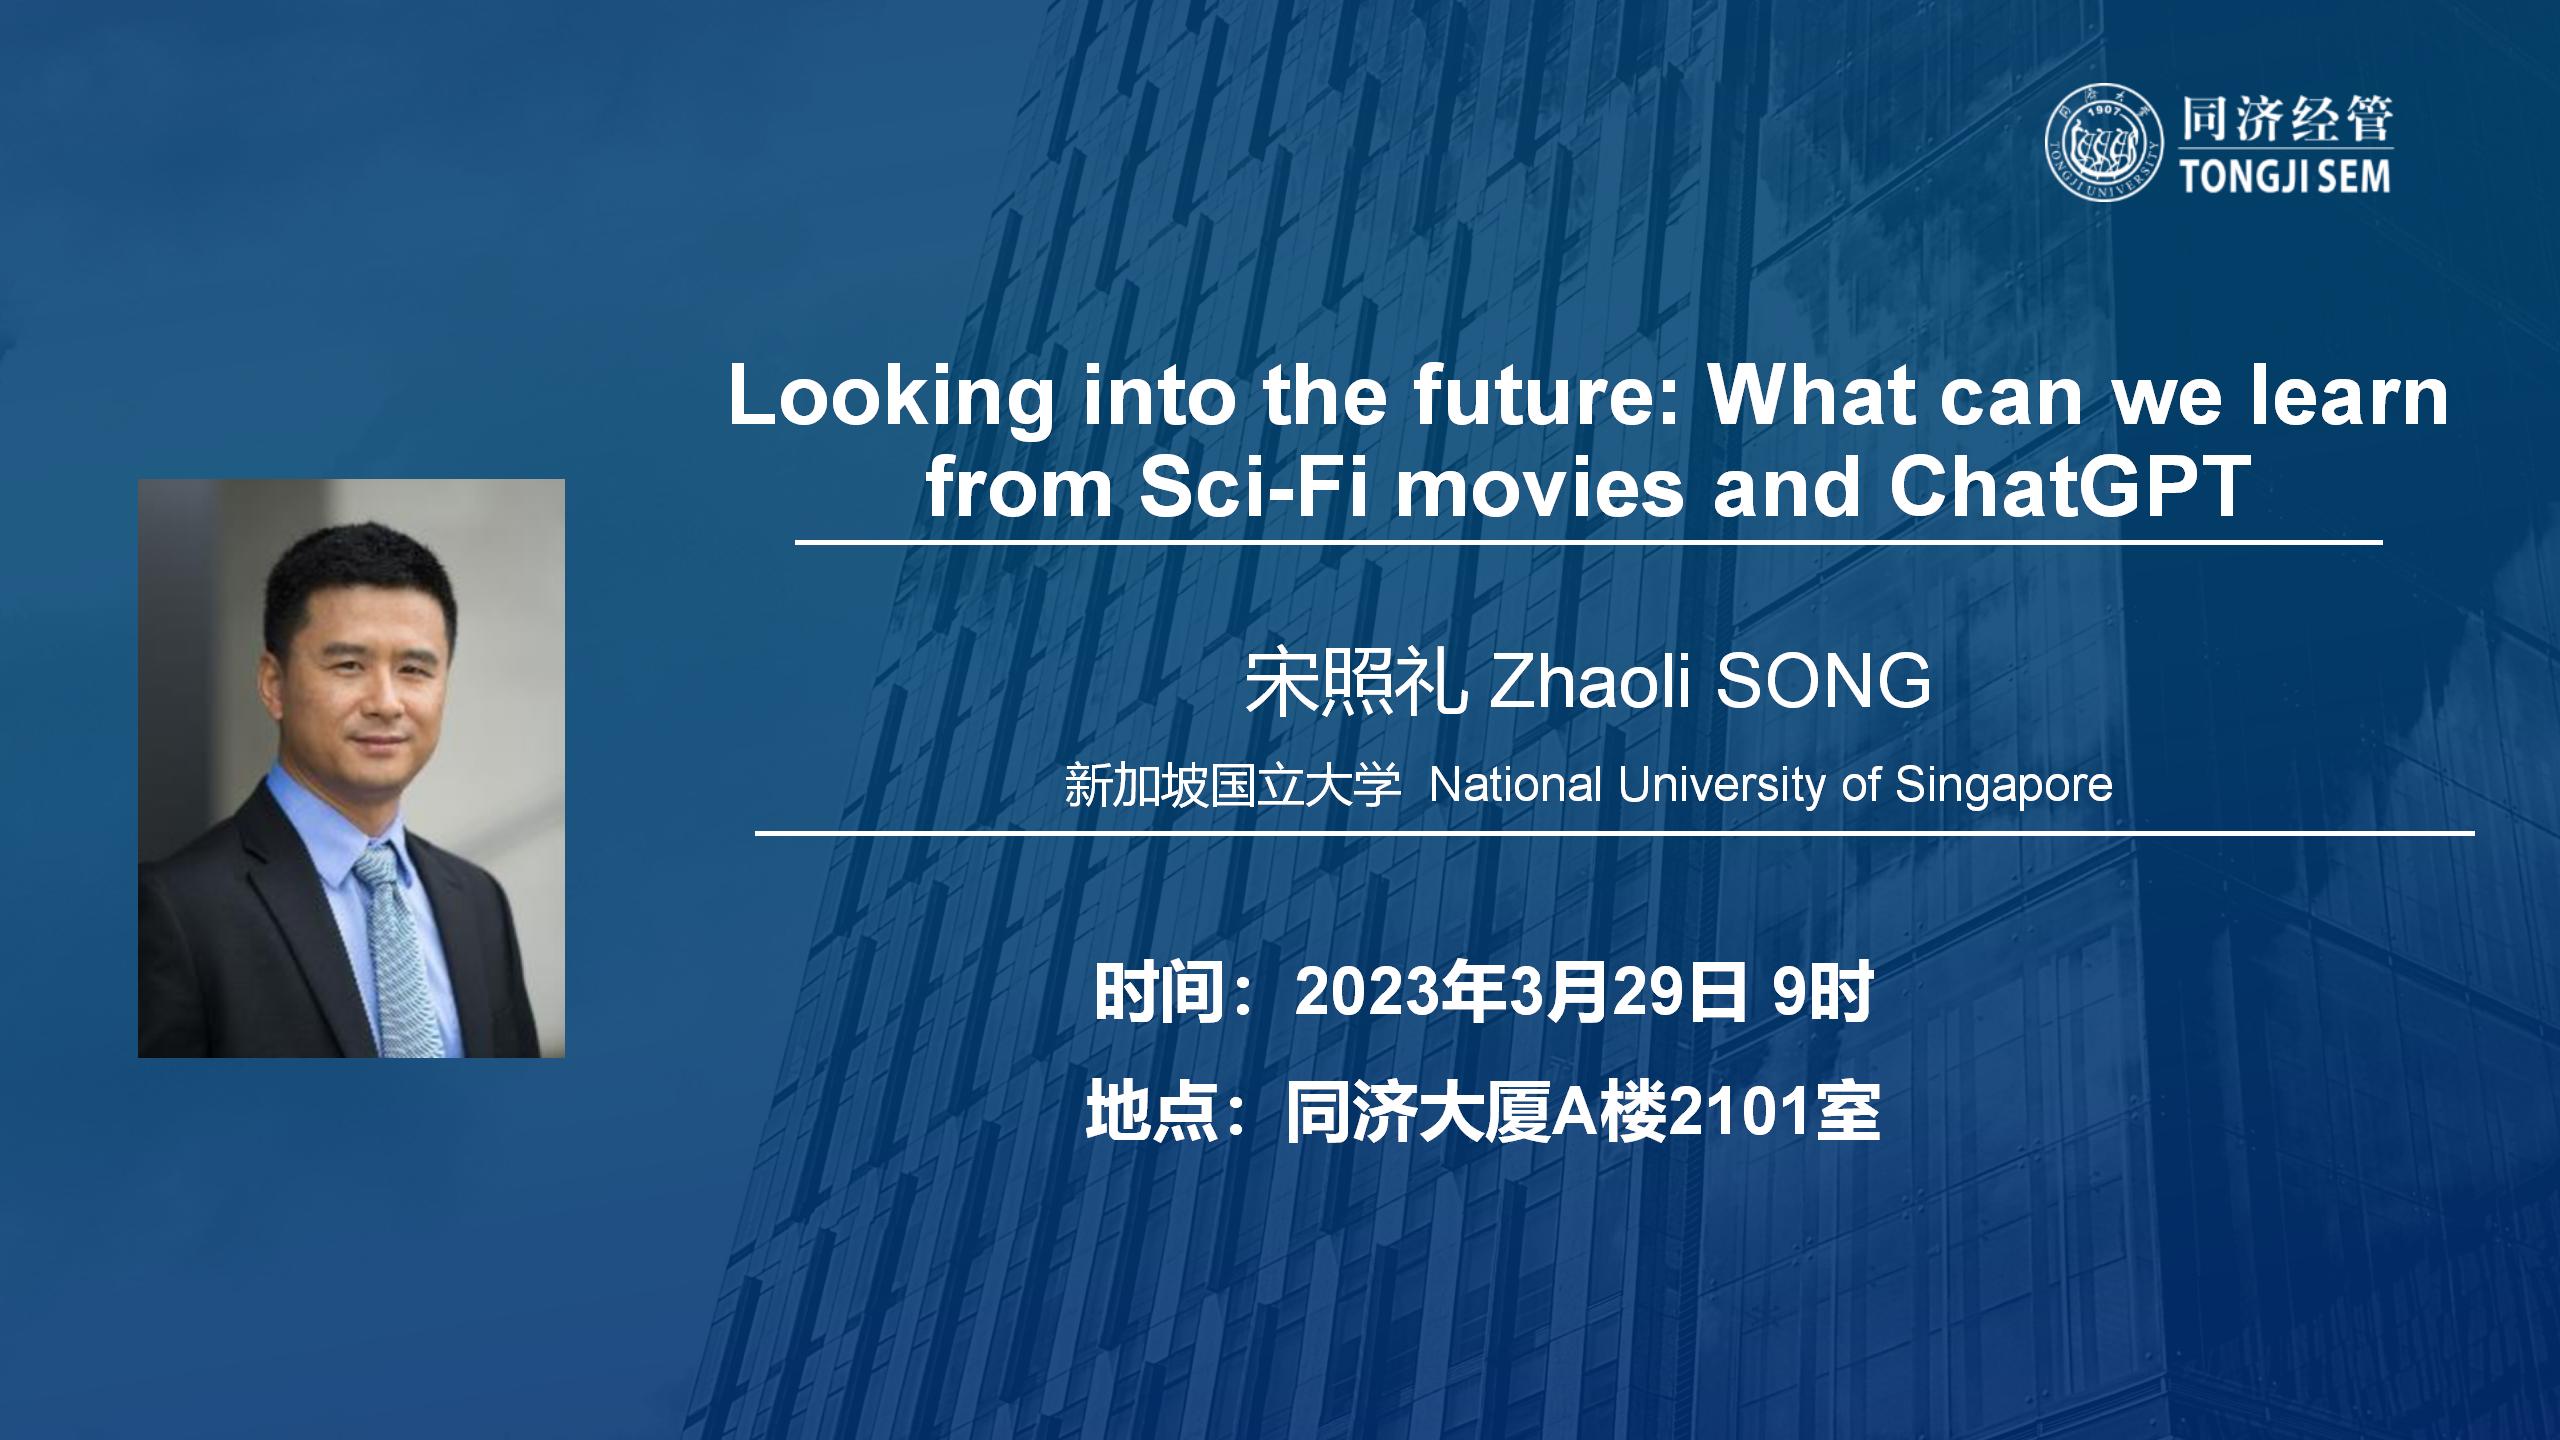 Looking into the future: What can we learn from Sci-Fi movies and ChatGPT